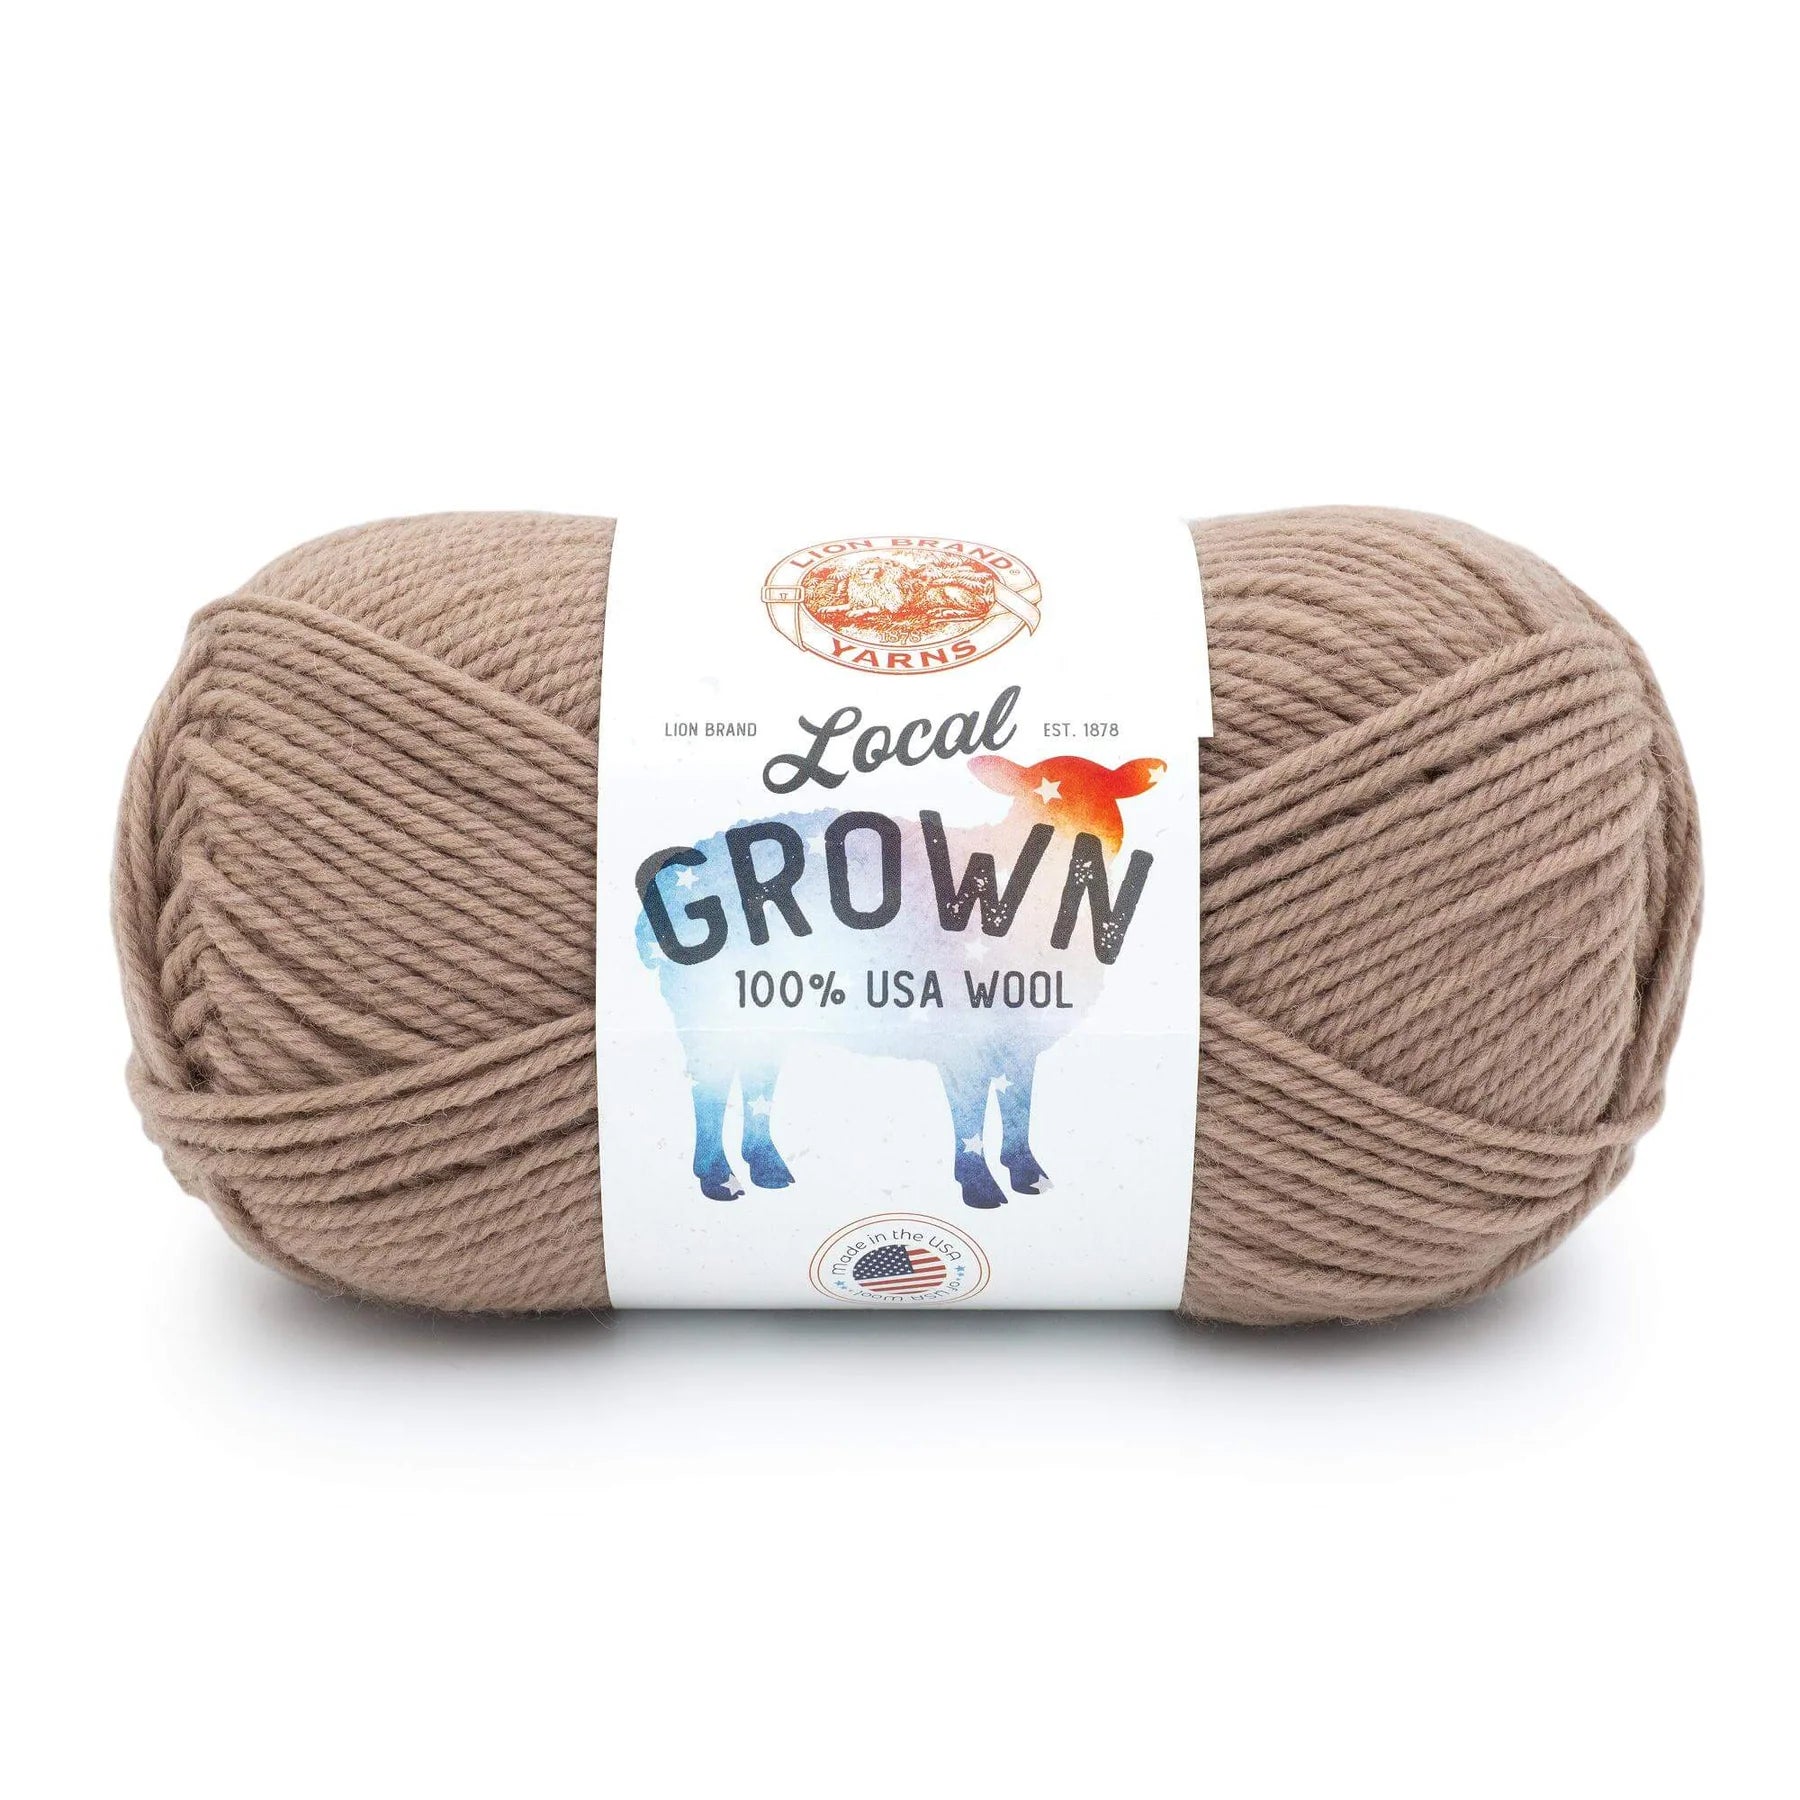 Local Grown - 100% USA wool - Worsted weight yarn – gather here online